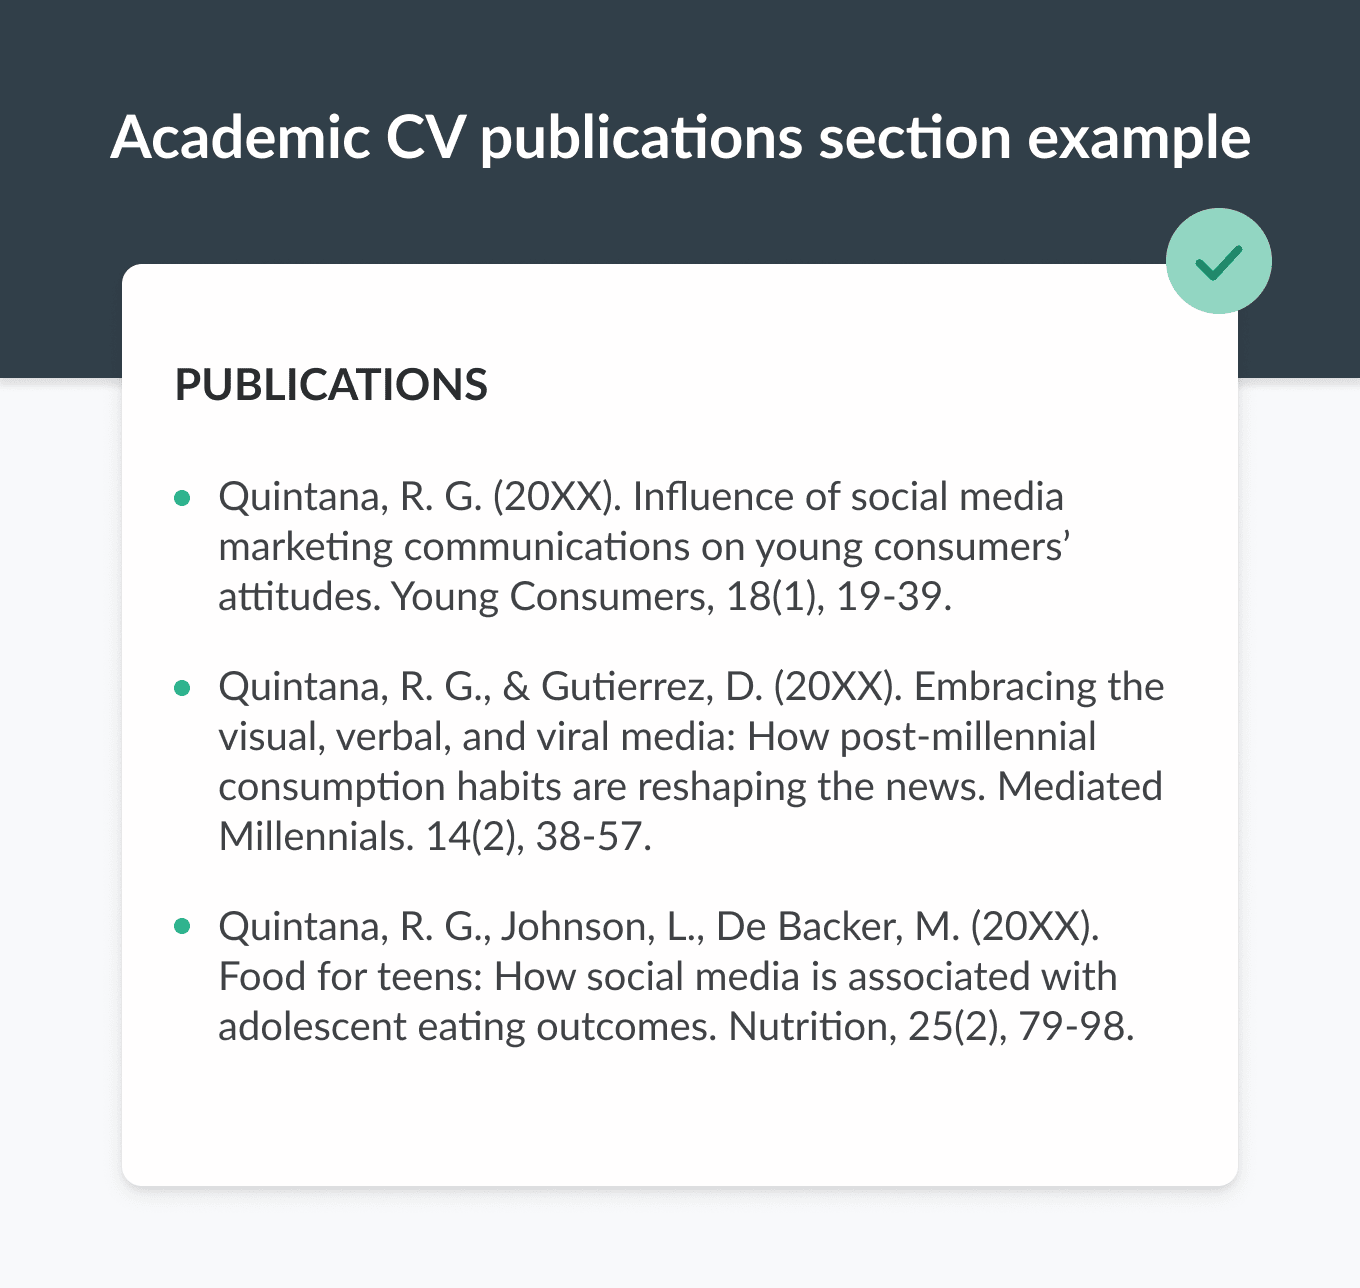 An example publication section from an academic CV with citations for three recently published journal articles